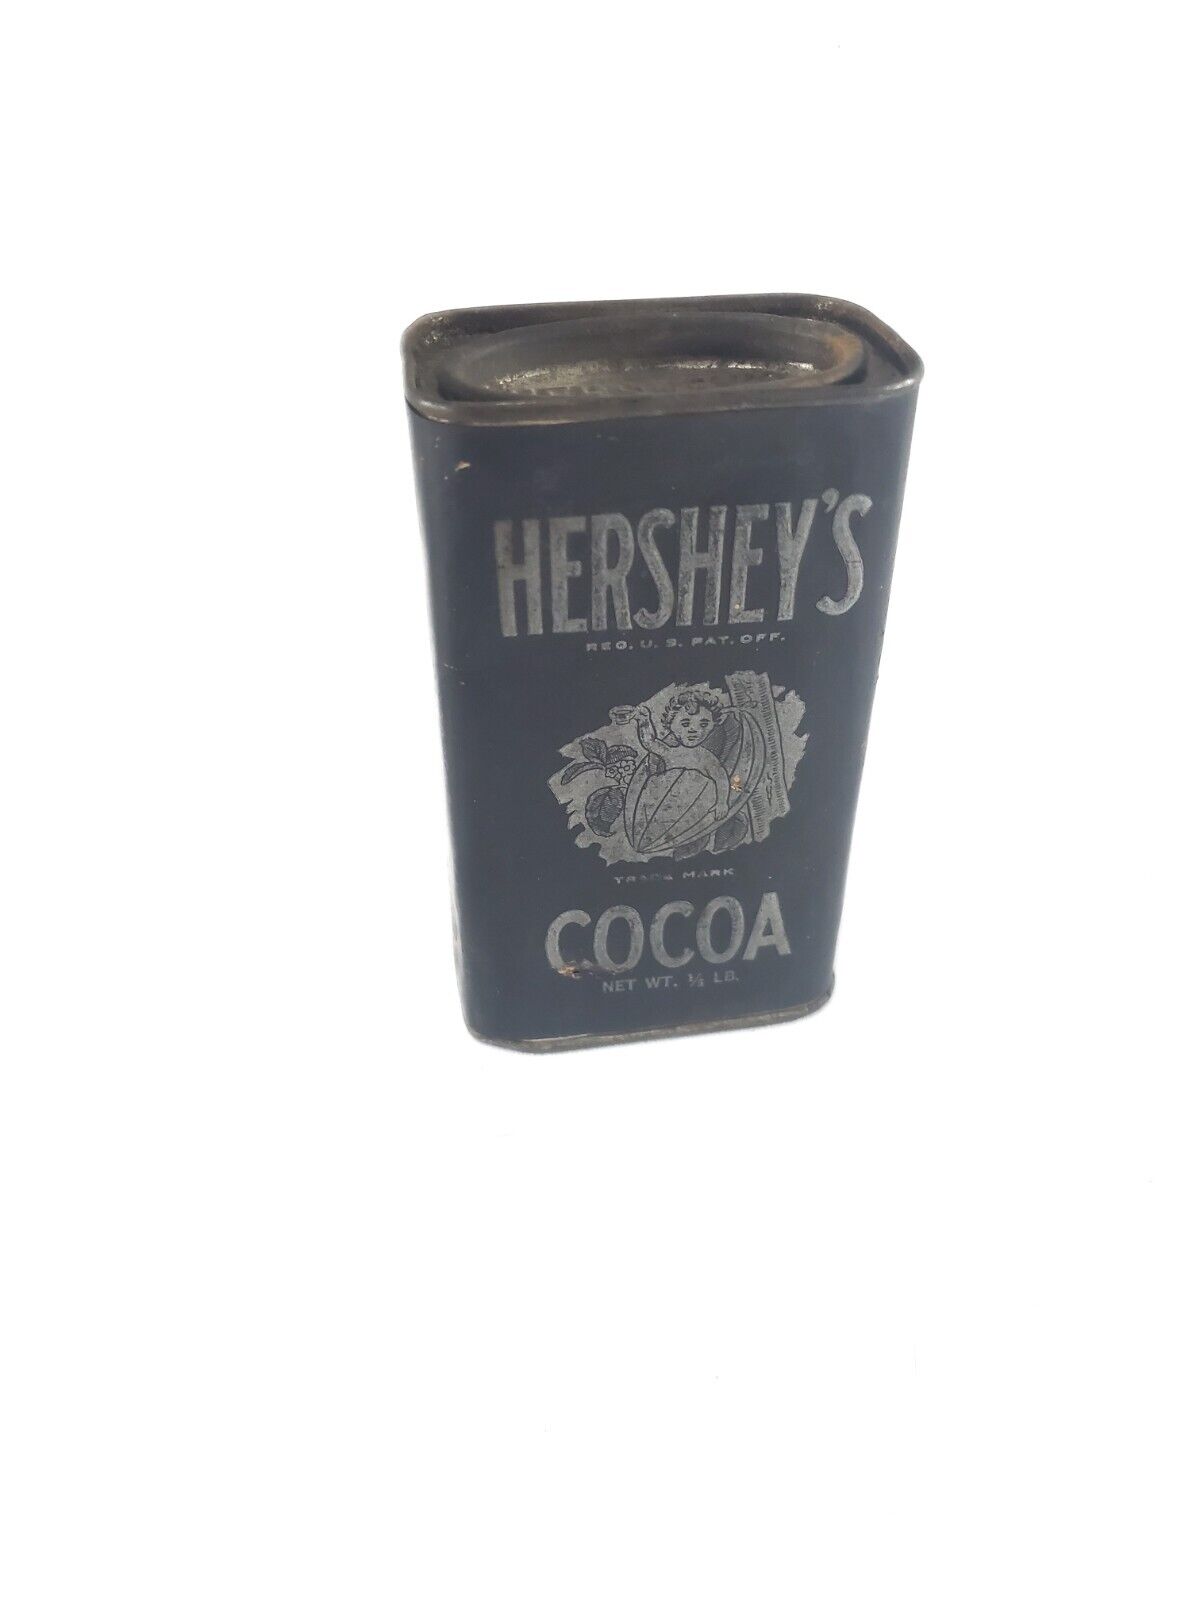 1900 Hershey’s Cocoa Chocolate Antique 3.5 oz Tin Can